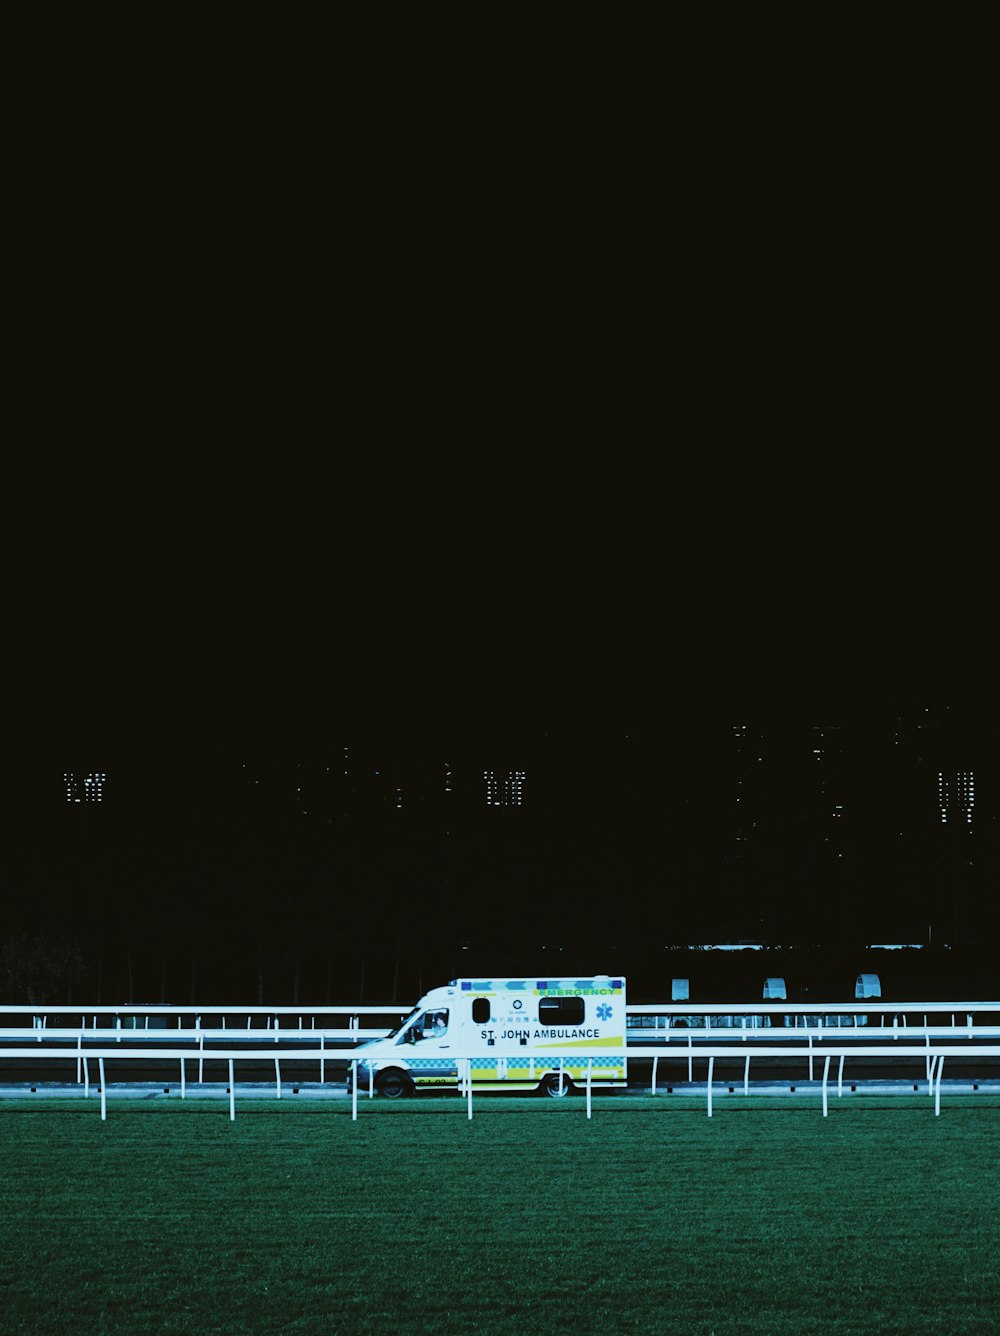 a horse race track at night with a white truck on it